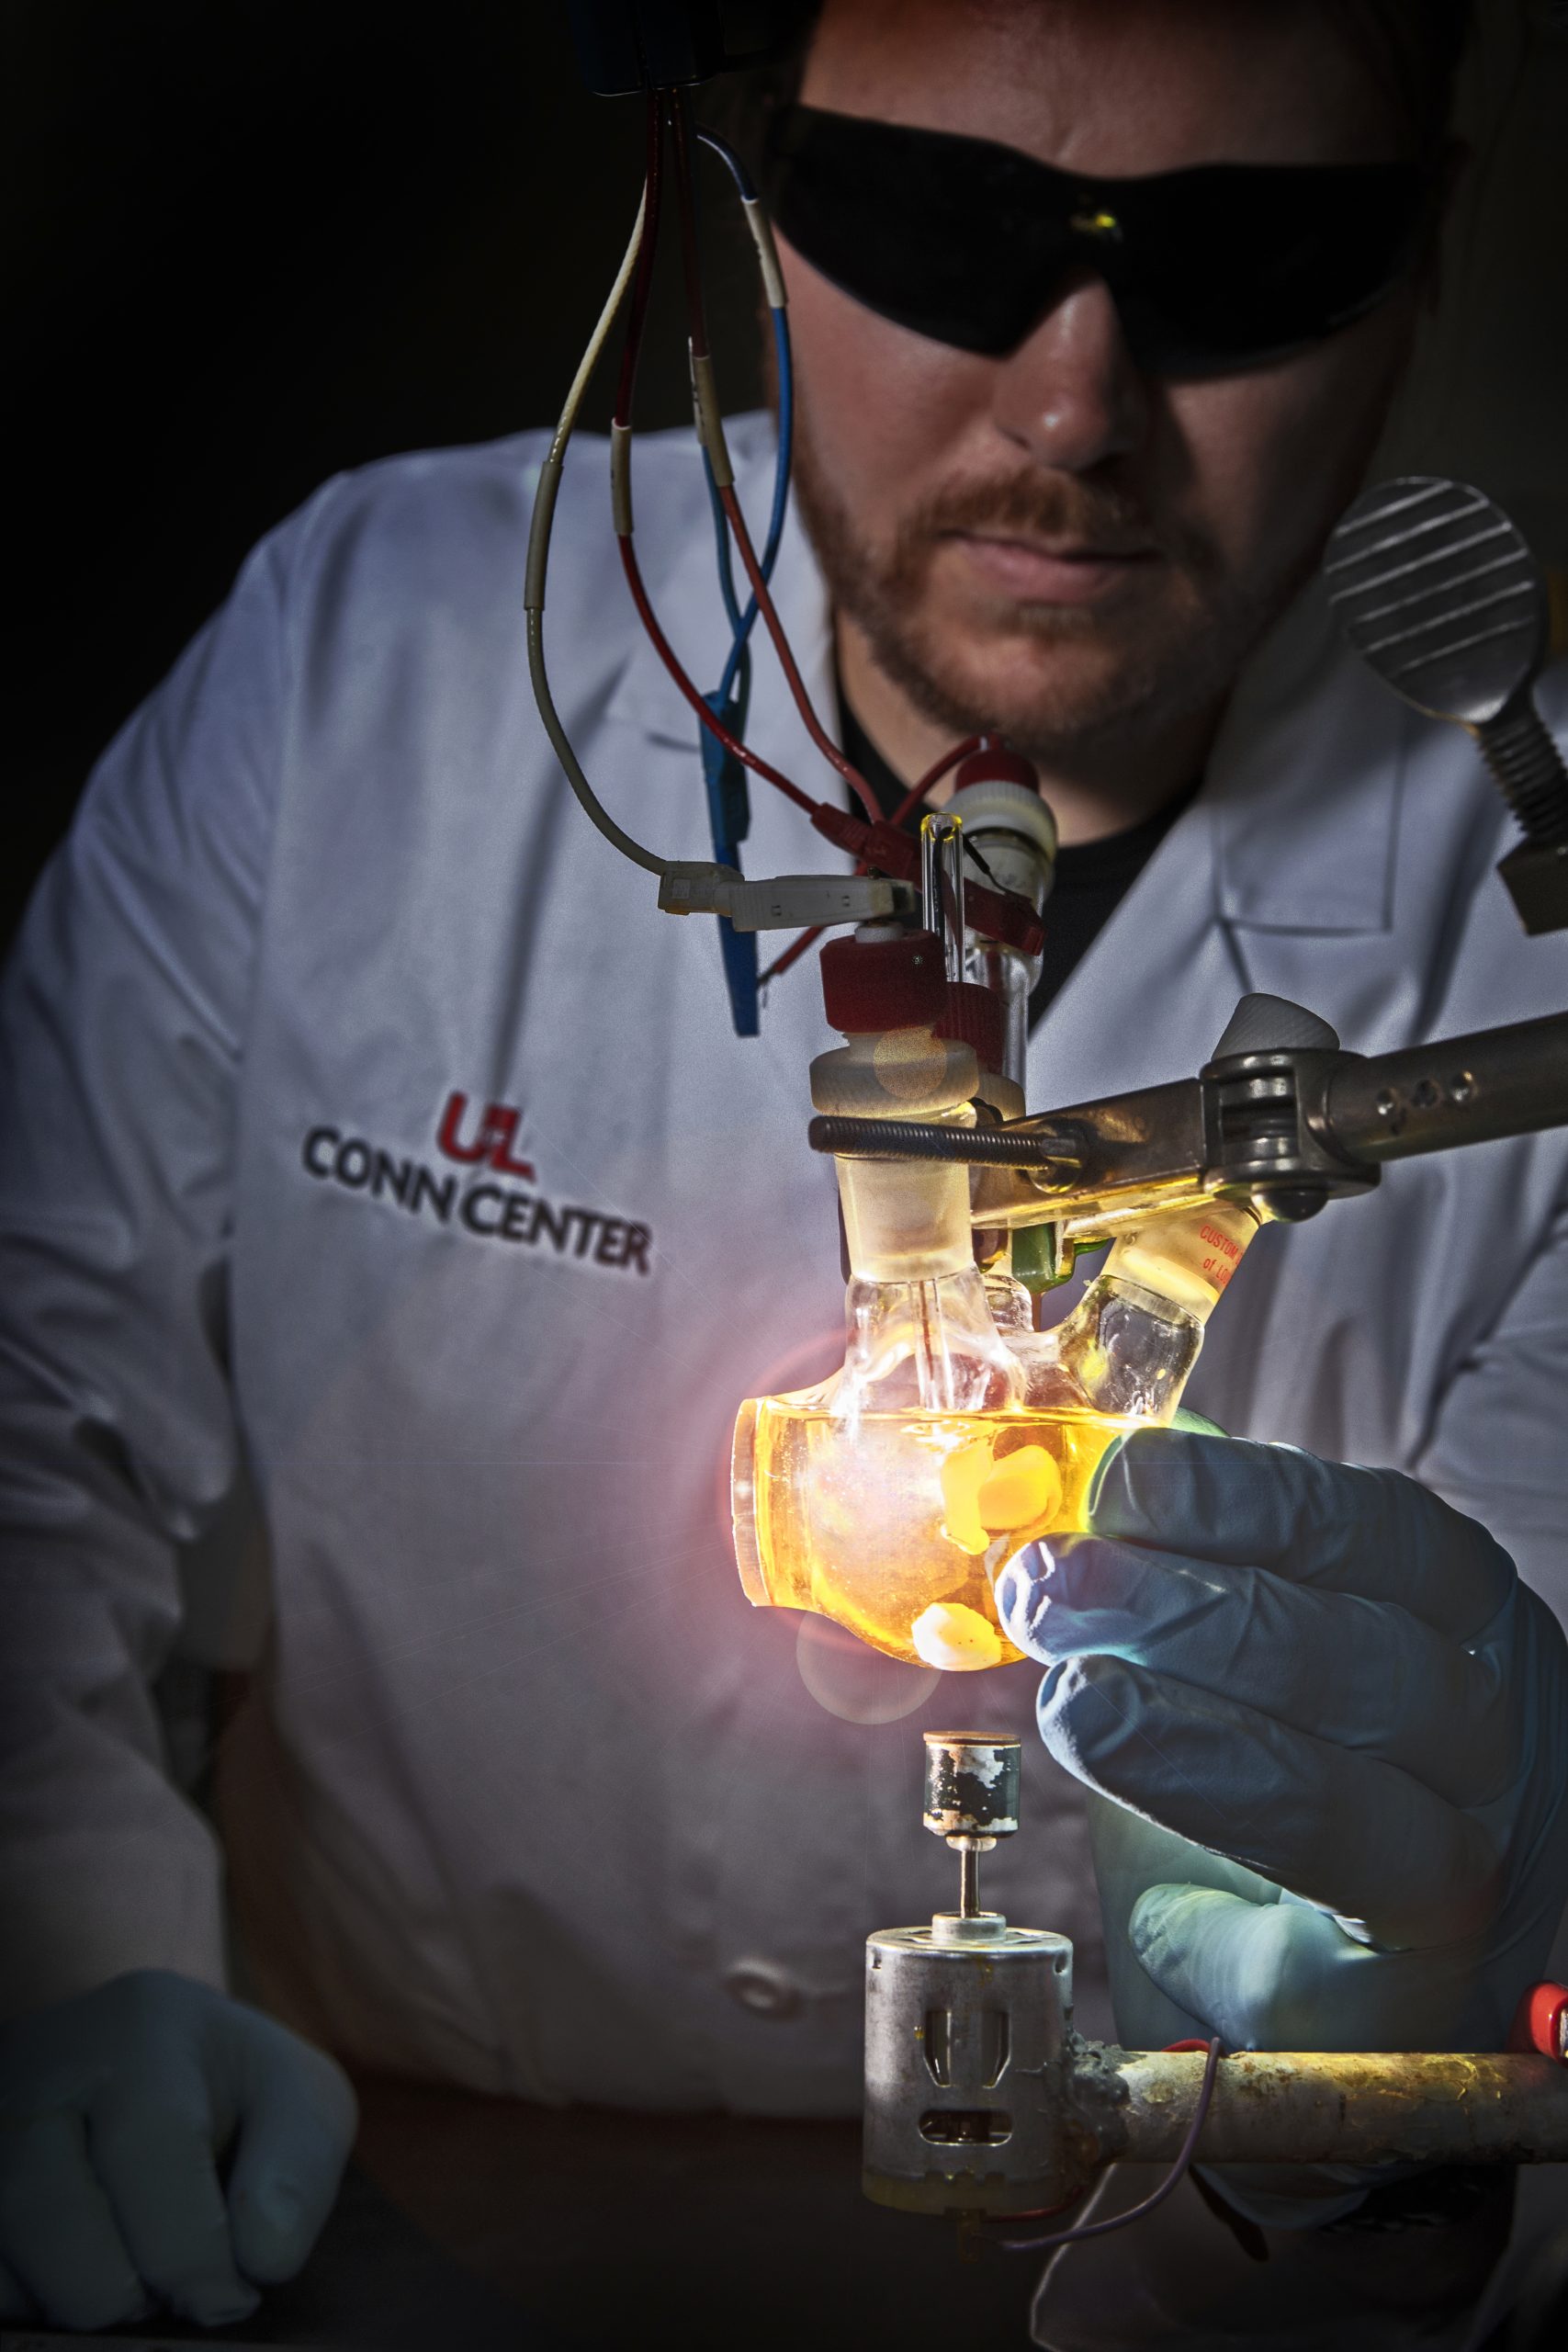 Researcher in lab coat holding a lightbulb